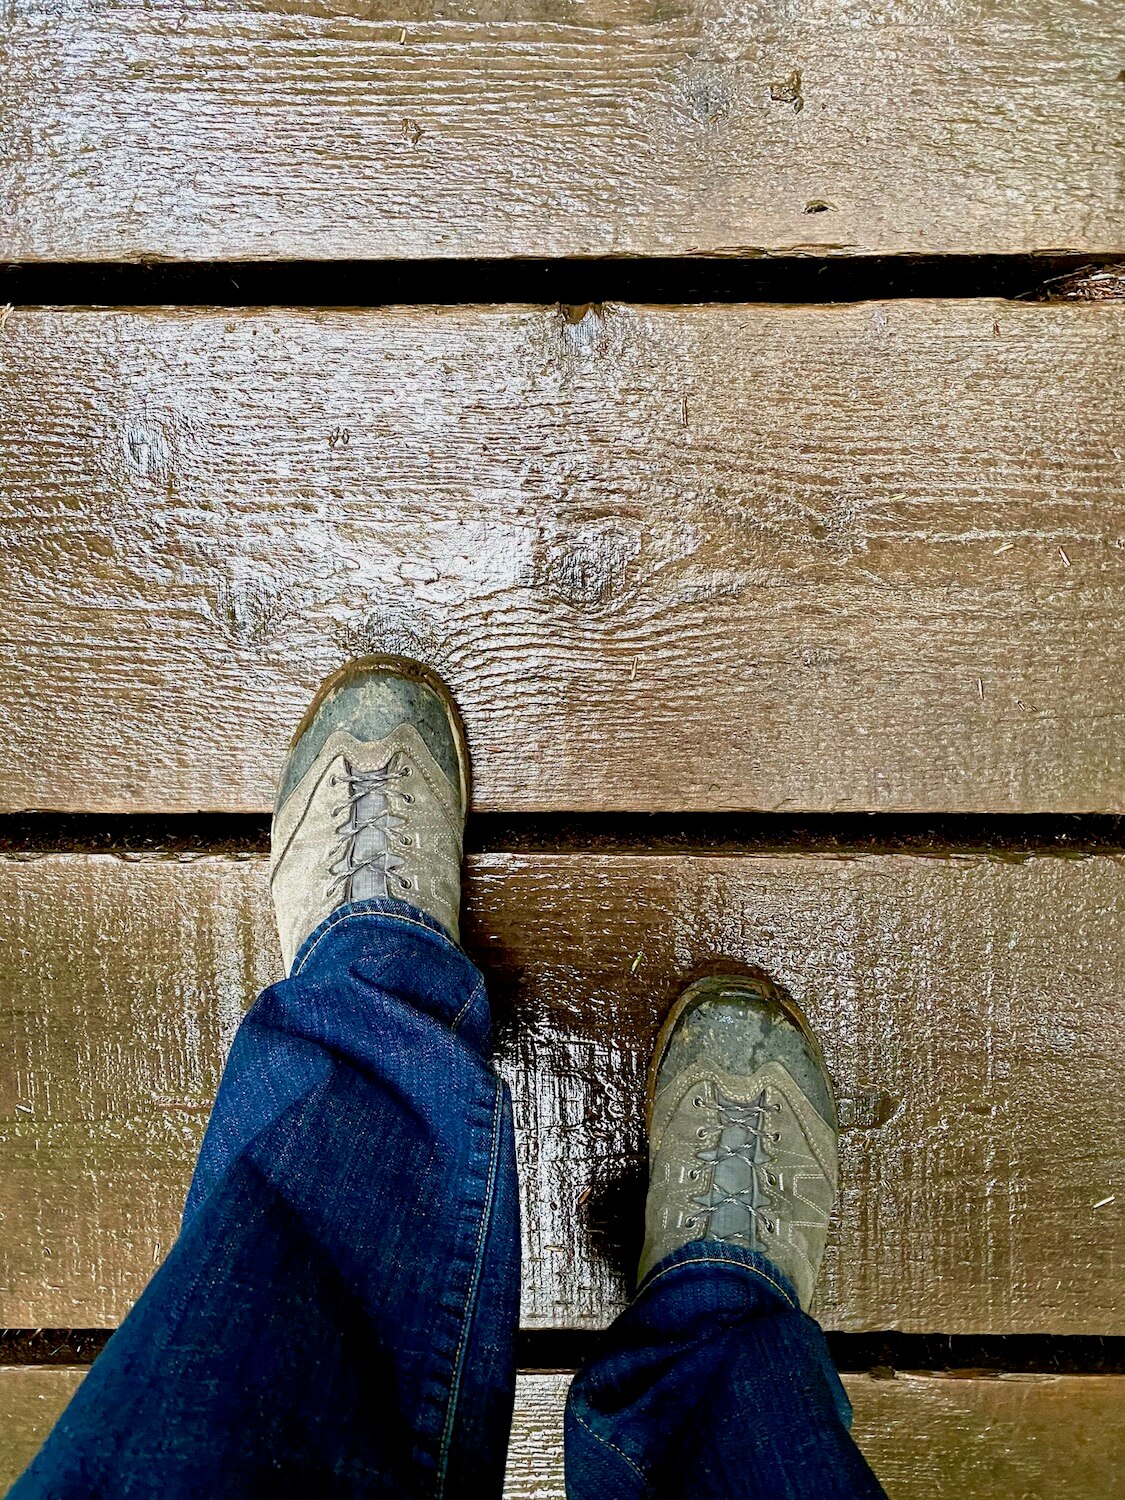 Two feet in hiking boots with mud around the soles walk on wet planks of wood. The figure is wearing jeans.